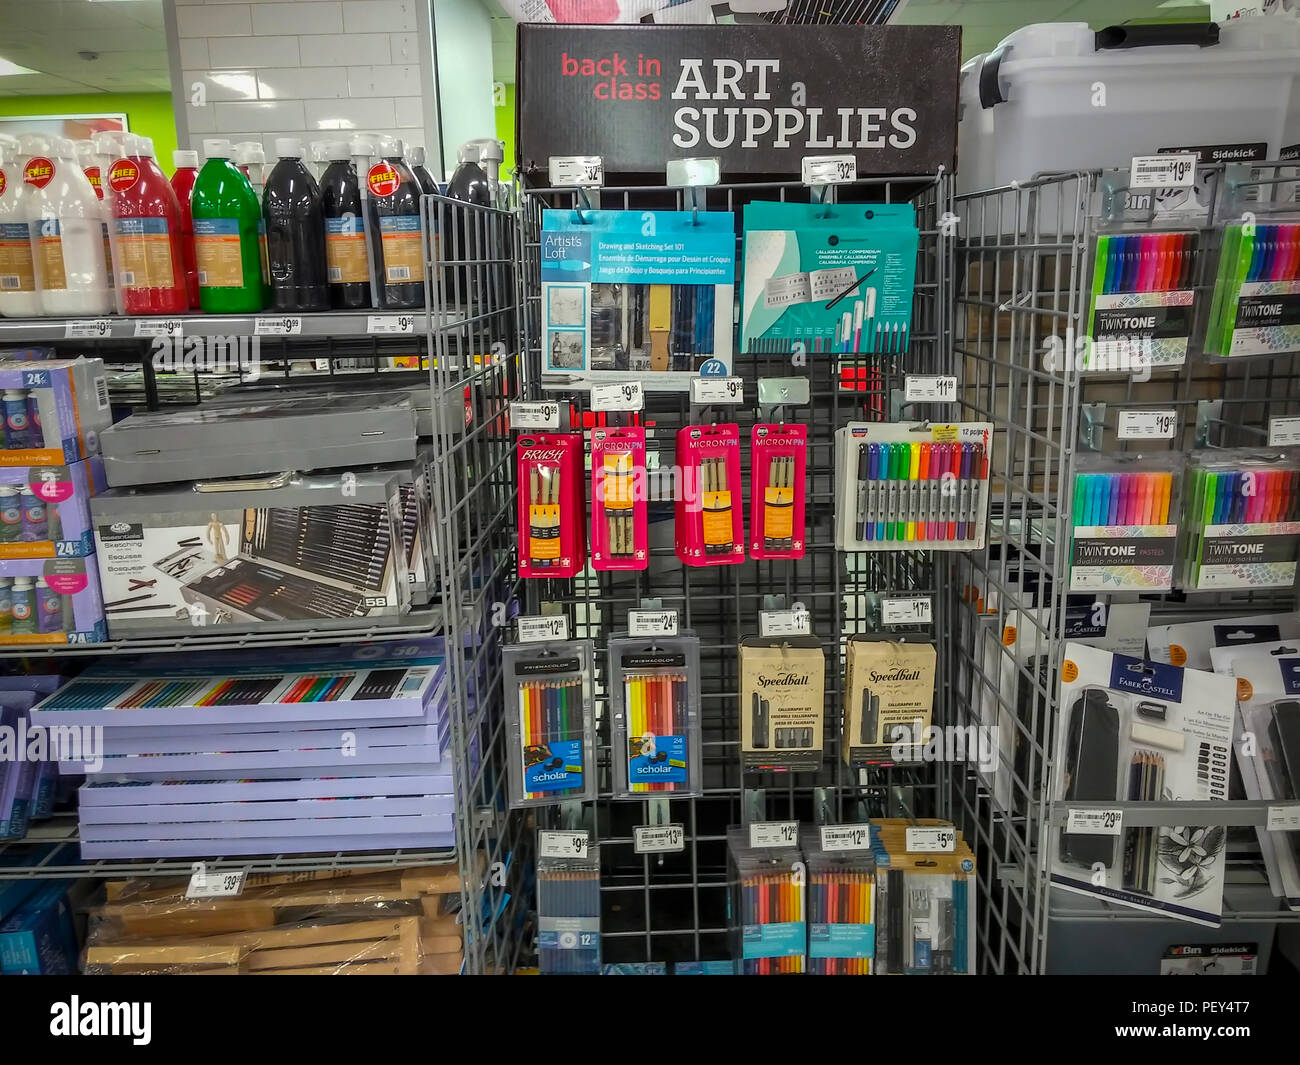 https://c8.alamy.com/comp/PEY4T7/back-to-school-art-supplies-in-a-store-in-new-york-on-thursday-august-16-2018-richard-b-levine-PEY4T7.jpg